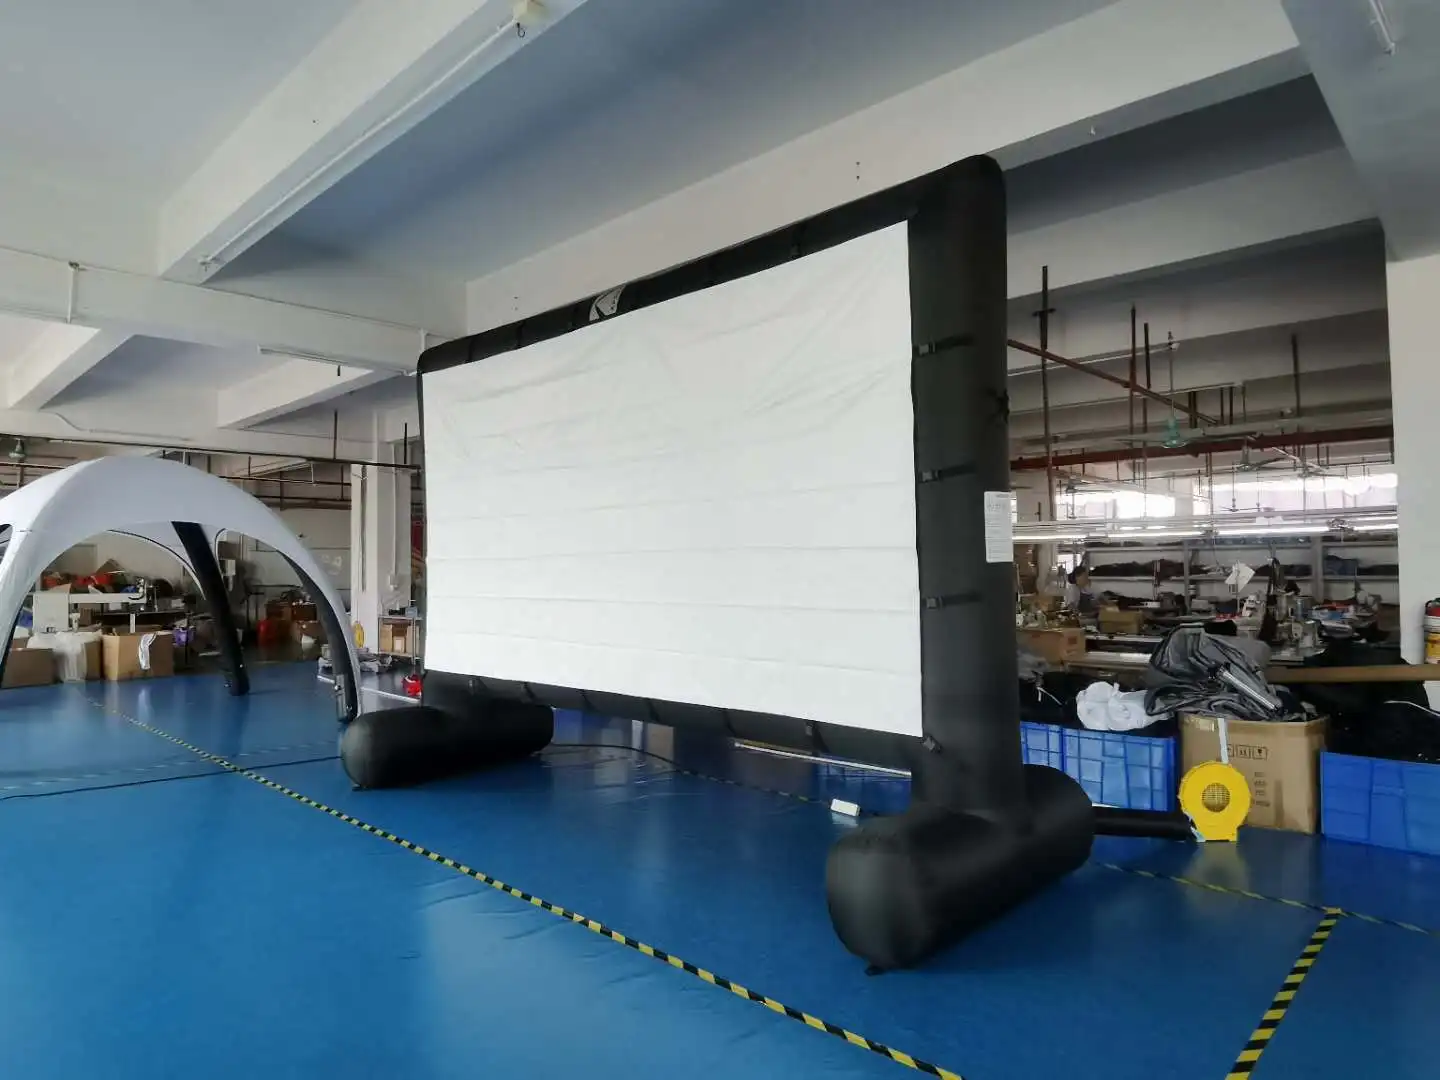 Inflatable Movie Screen Outdoor Movable air-tight Inflatable Portable Movie Viewing Screen Custom Play Movie Projection